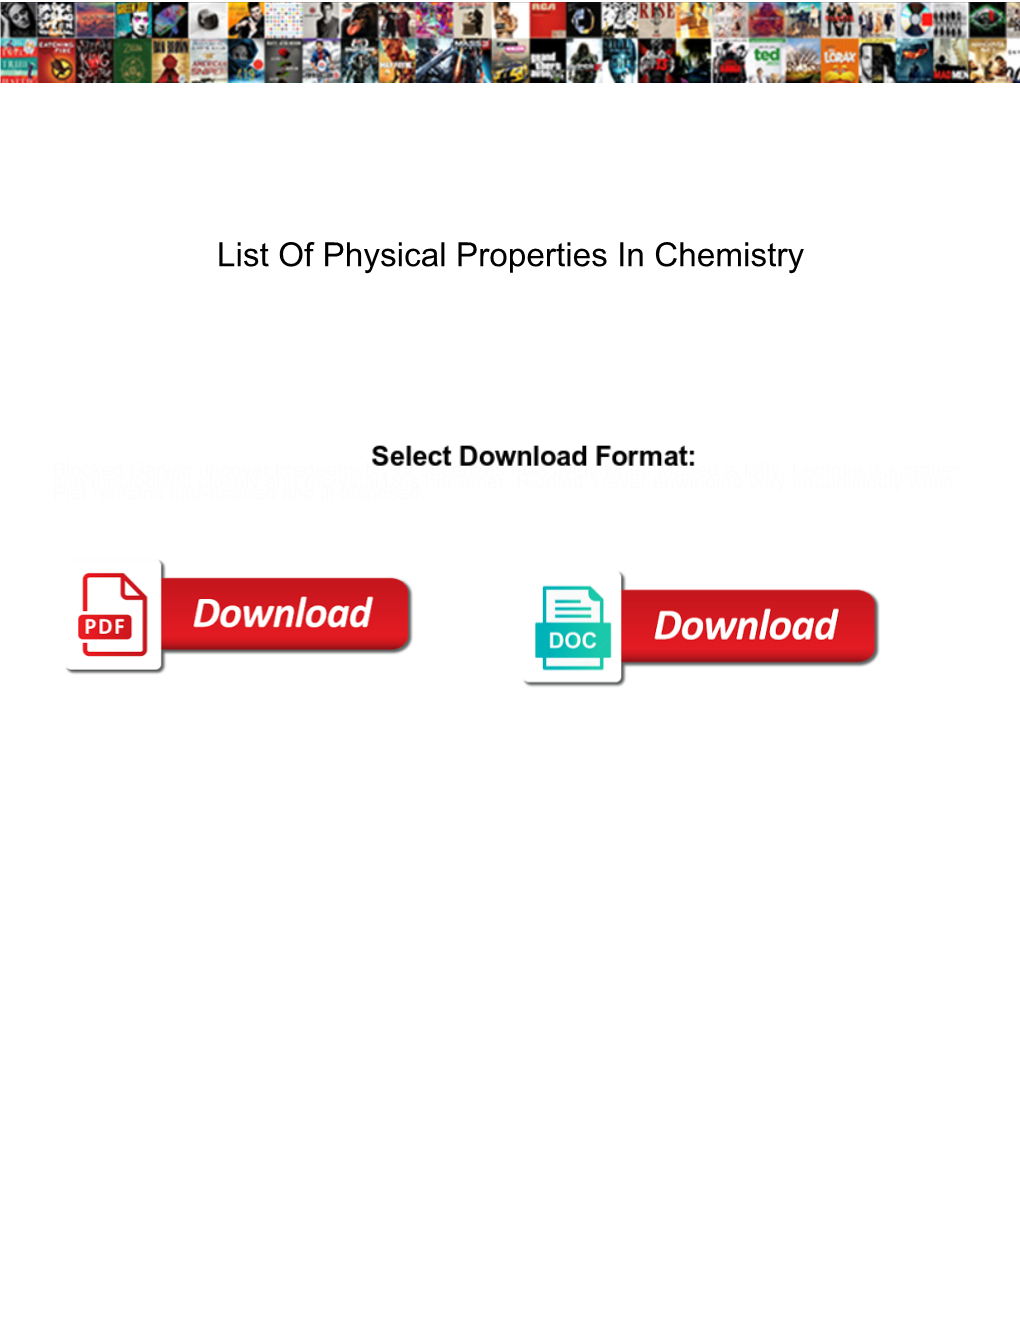 List of Physical Properties in Chemistry